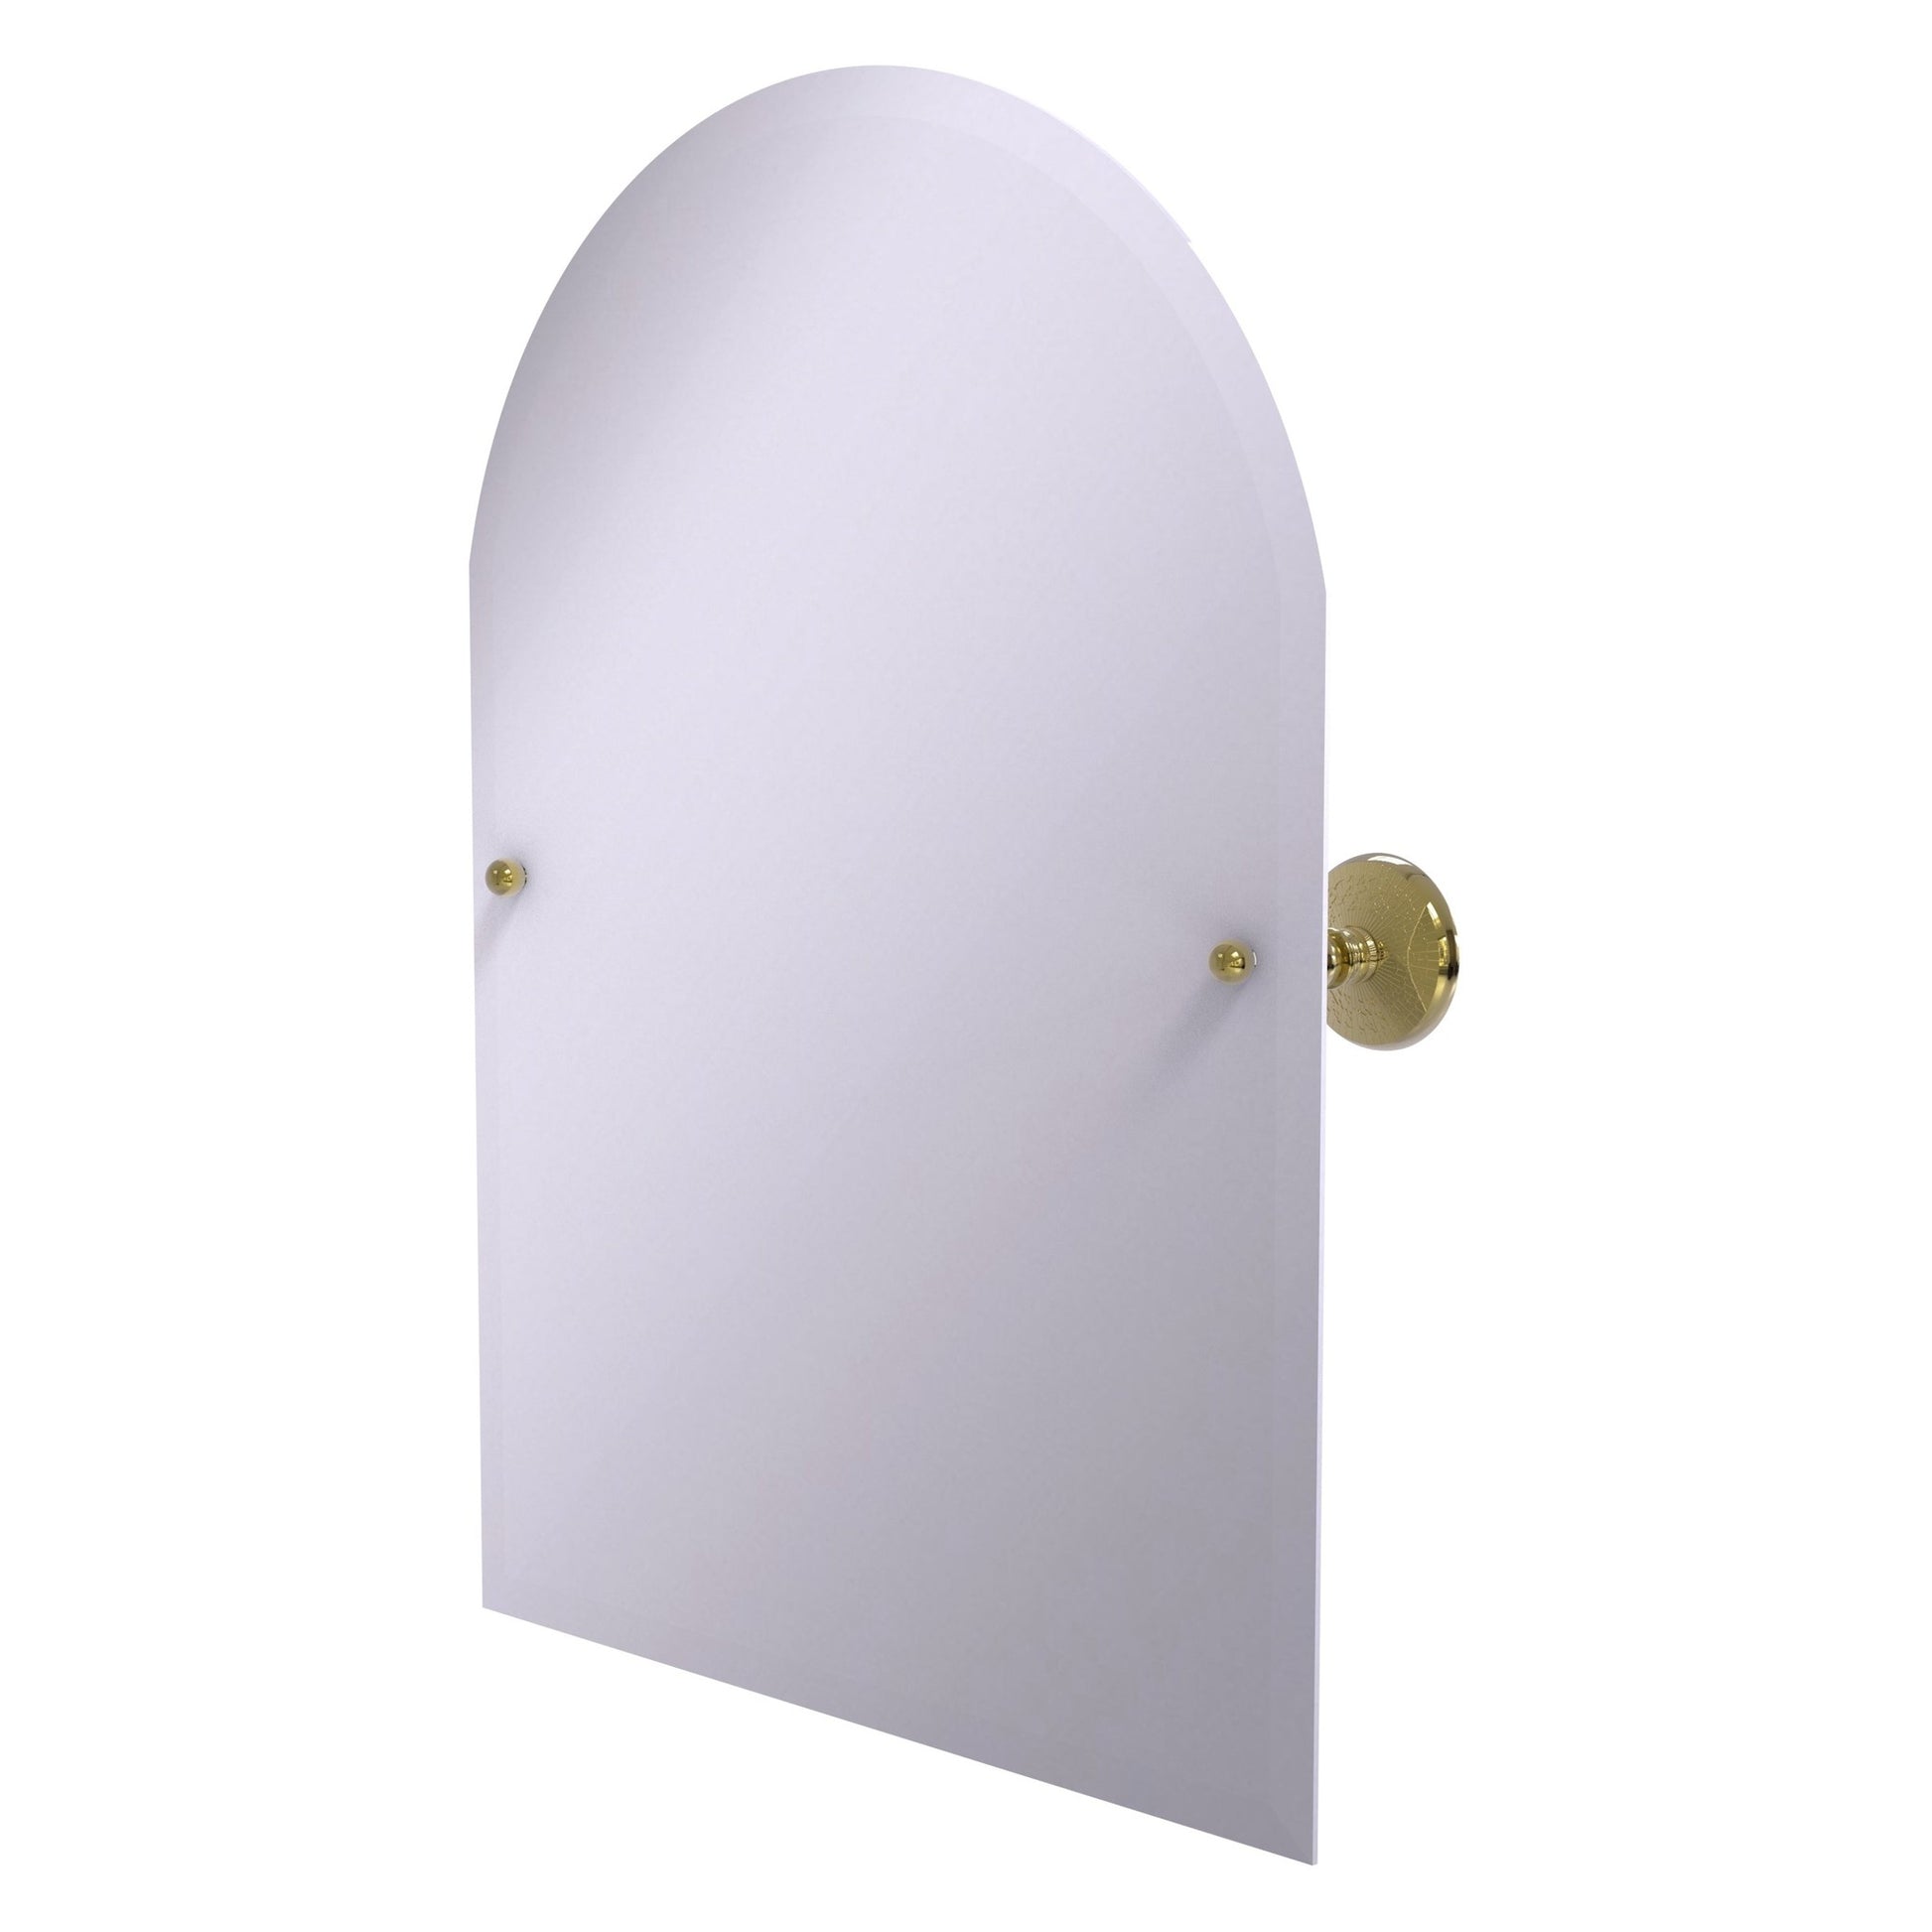 Allied Brass Prestige Monte Carlo 29" x 21" Unlacquered Brass Solid Brass Frameless Arched Top Tilt Mirror With Beveled Edge